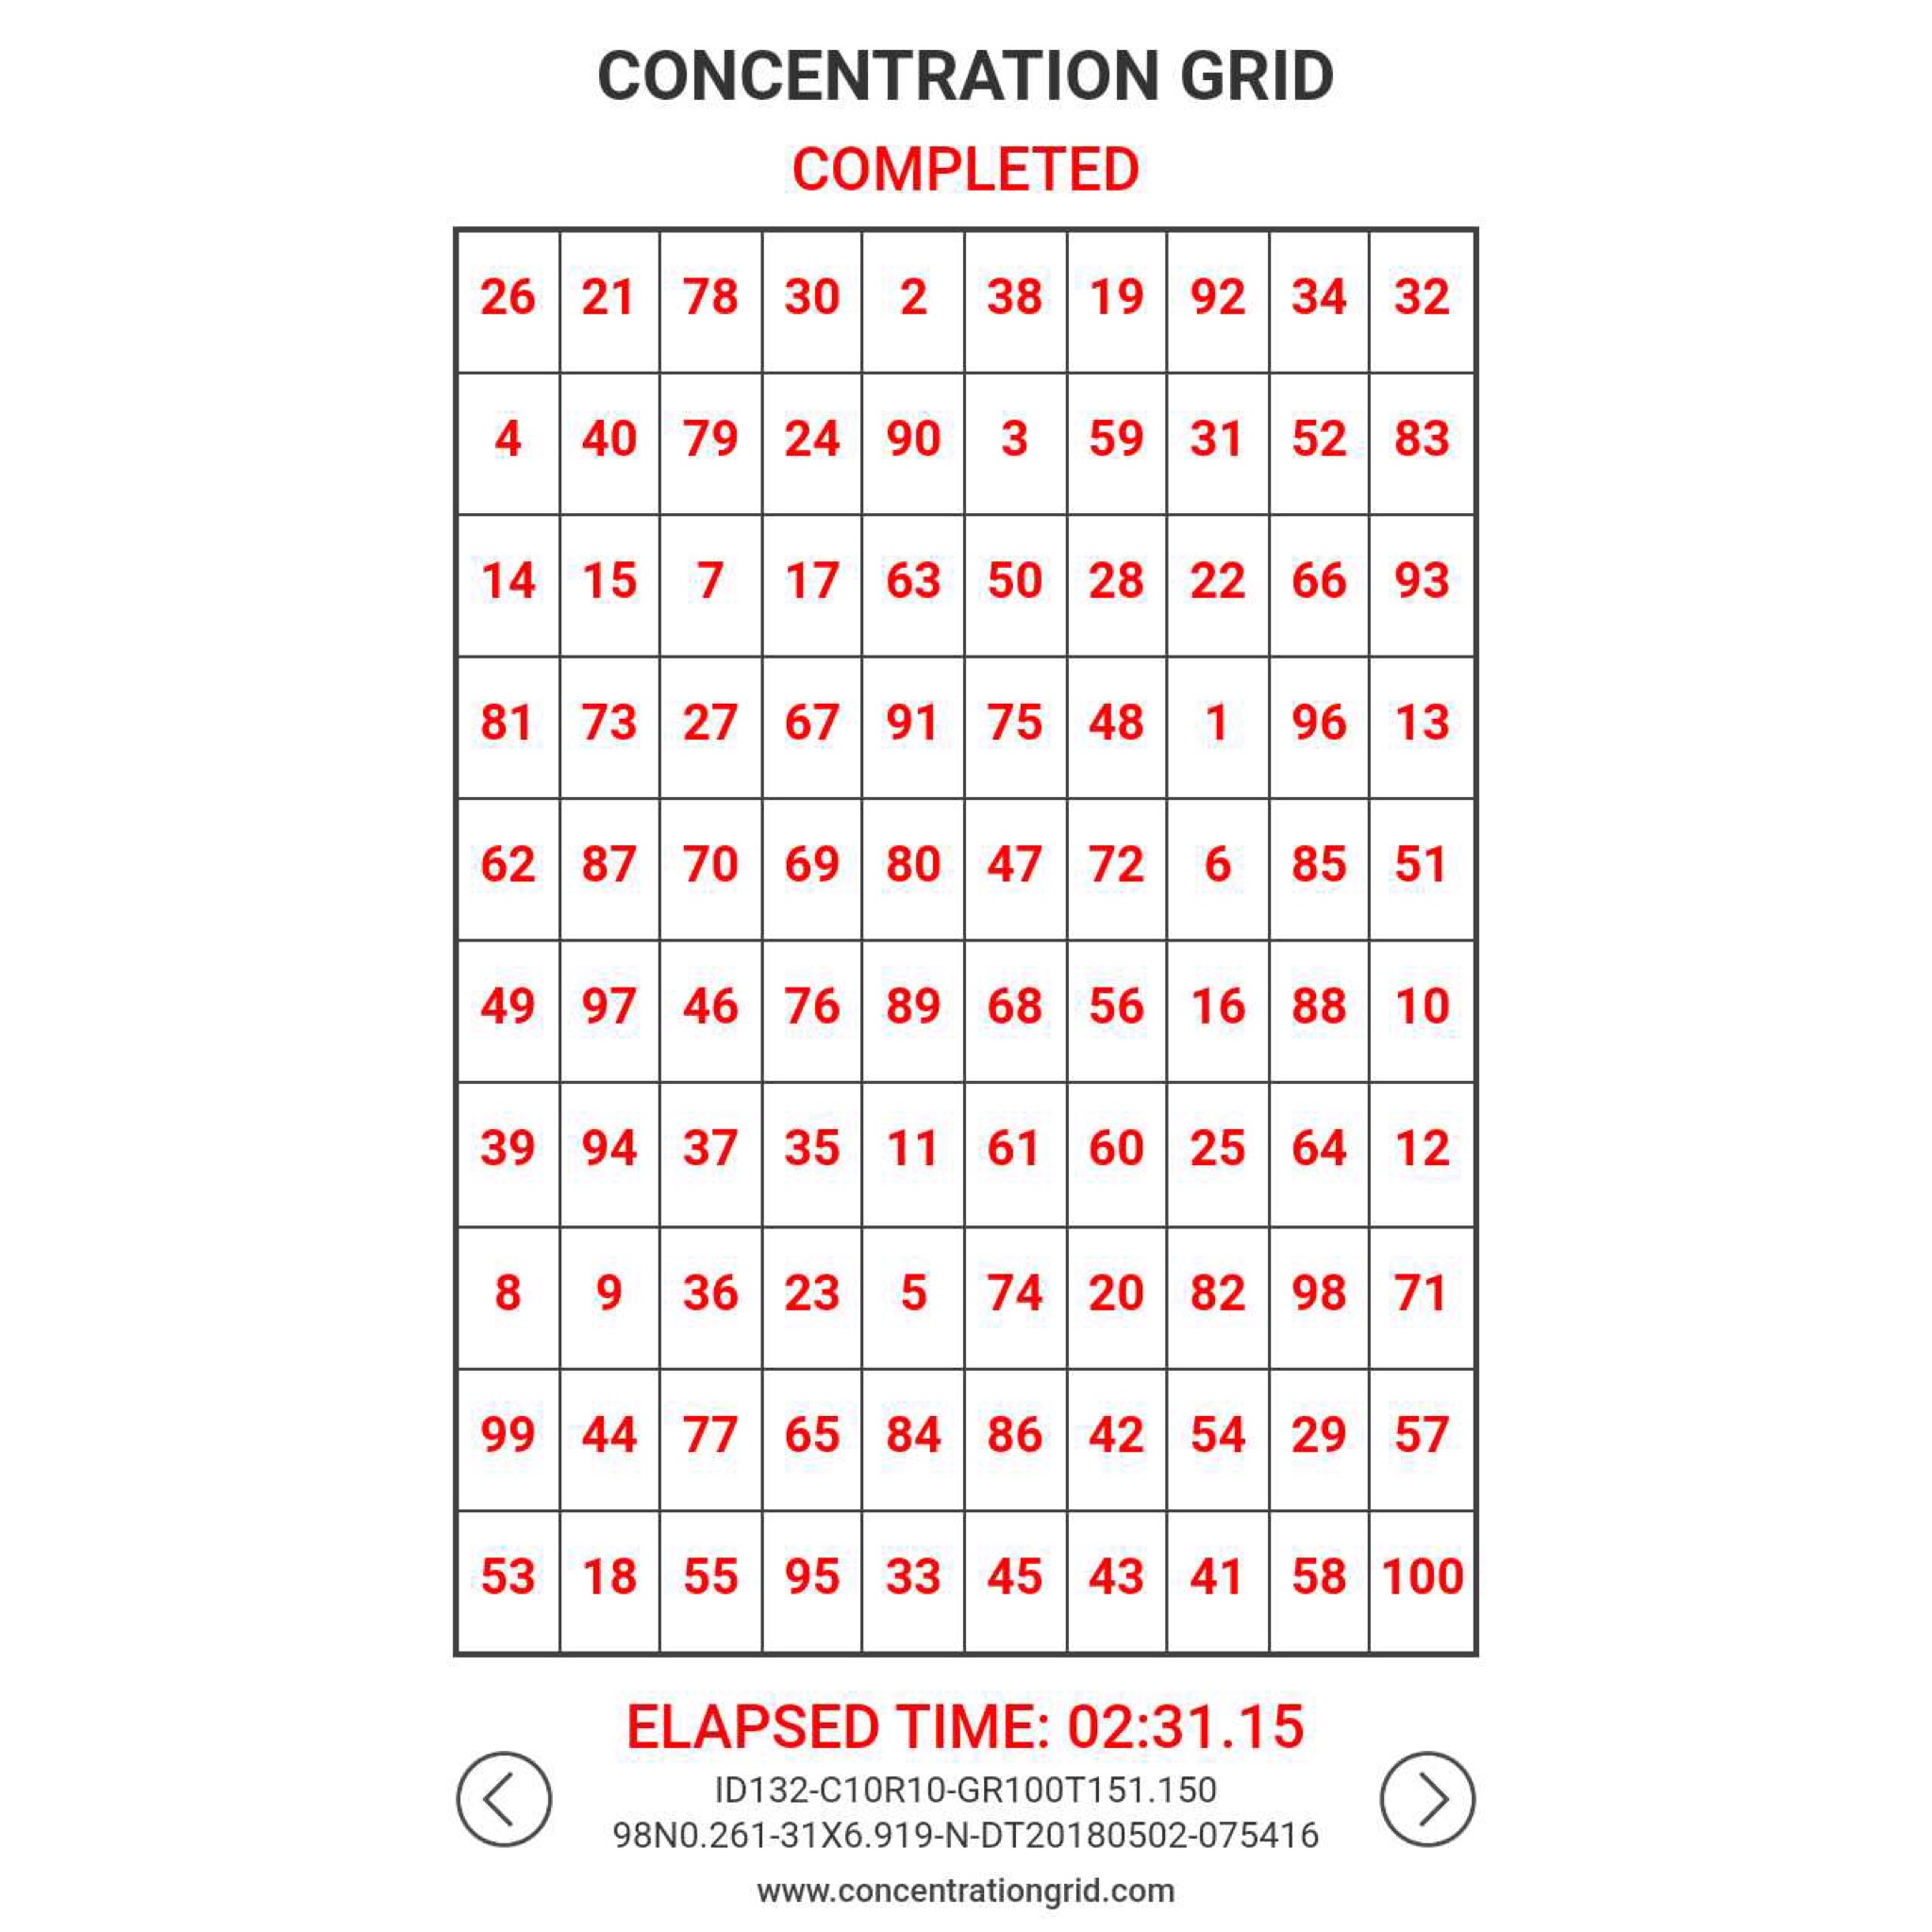 Concentration Grid is a web/mobile device app implementation of a mental skills training exercise for students, athletes, coaches, sports performance/psychology staff, trainers, teachers, parents, etc. Use concentration grids a/k/a mental focus grids with student-athletes as a tool for assessment, development, practice/exercise of attention skills ... and for competitive challenge and fun. Generate grids in varying sizes of between 3 and 14 columns/rows - small grids test speed/dexterity ... larger grids exercise focus/attention skills. Convenient gameplay/replay. History tracking (time/performance data). Share feature is integrated with social media. Post and track best gridtimes at the leaderboard. Make self-development a daily habit. #concentrationgrid #challengeyourself - concentrationgrid.com - concentrationgrid.net - tryconcentrationgrid.com